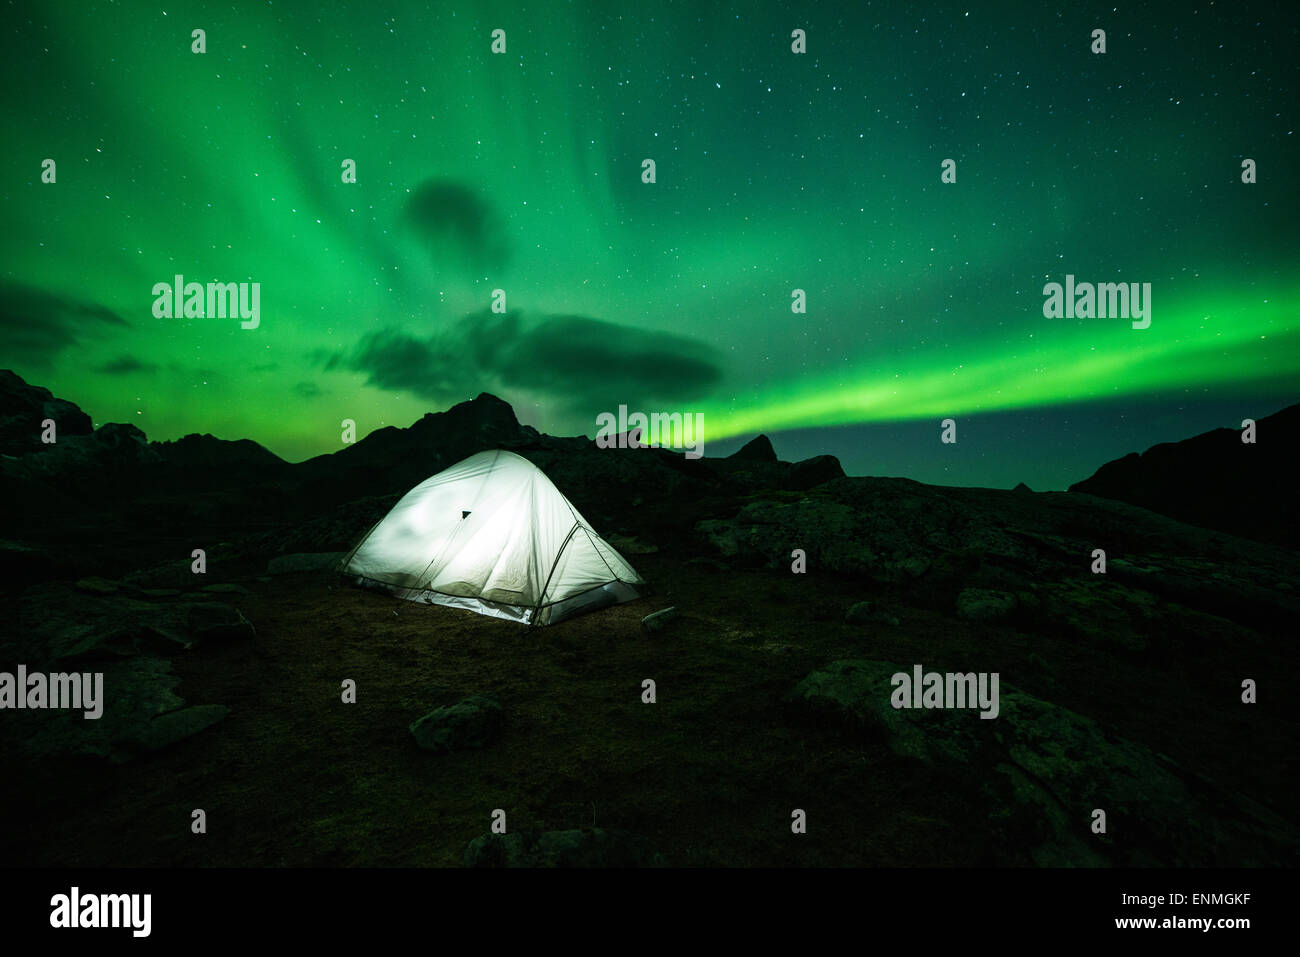 Northern Lights - Aurora Borealis fill sky over tent and mountains, Moskenesøy, Lofoten Islands, Norway Stock Photo